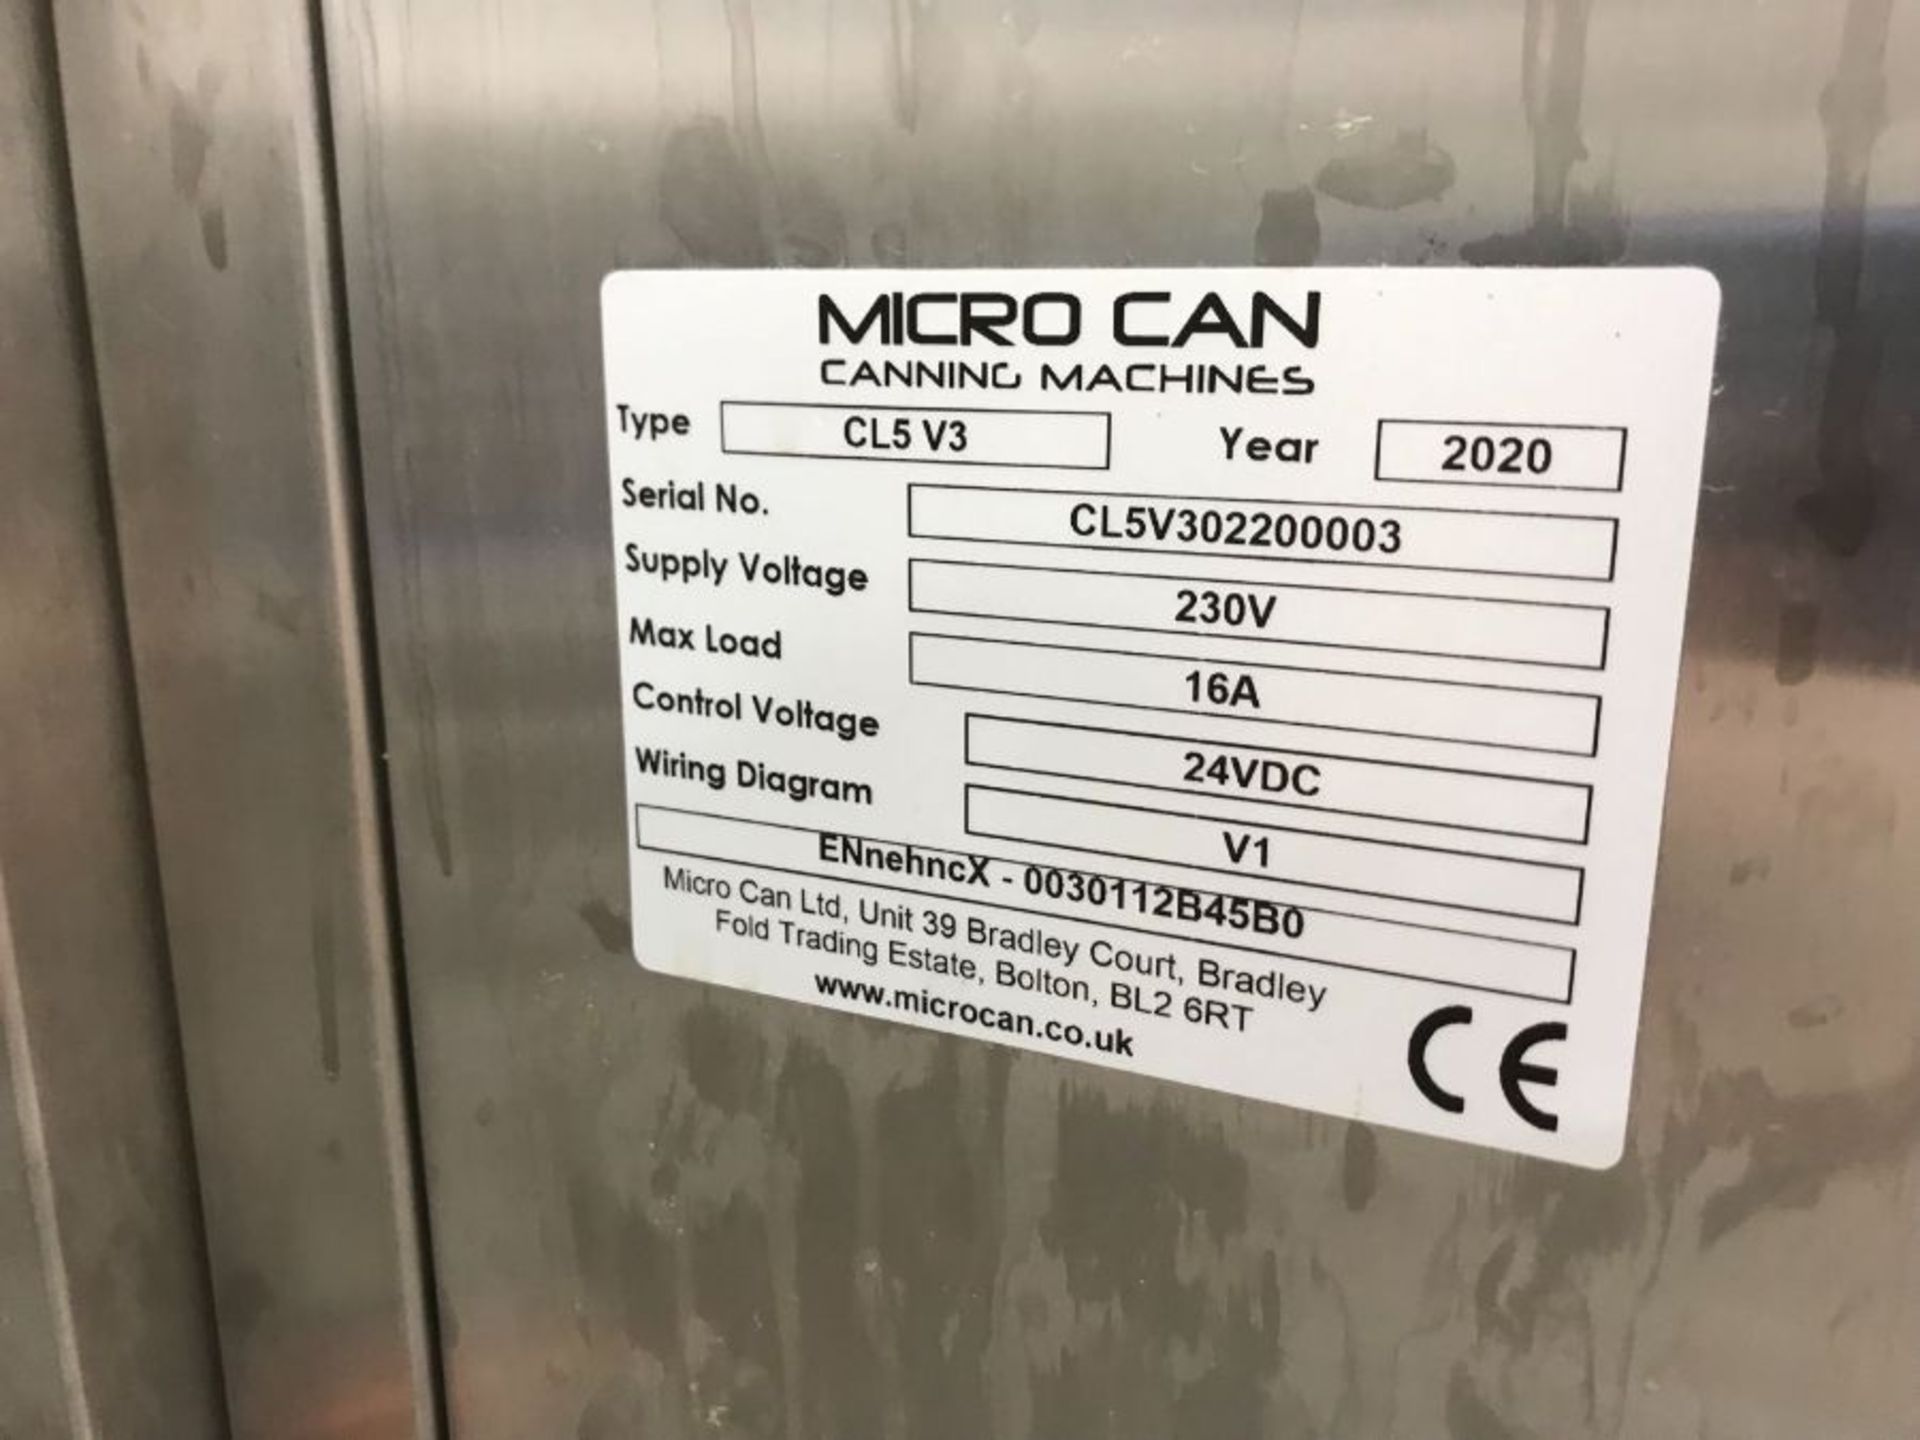 Micro Can Canning Machines CL5V3 linear can filling and seaming machine (2020) - Image 9 of 10